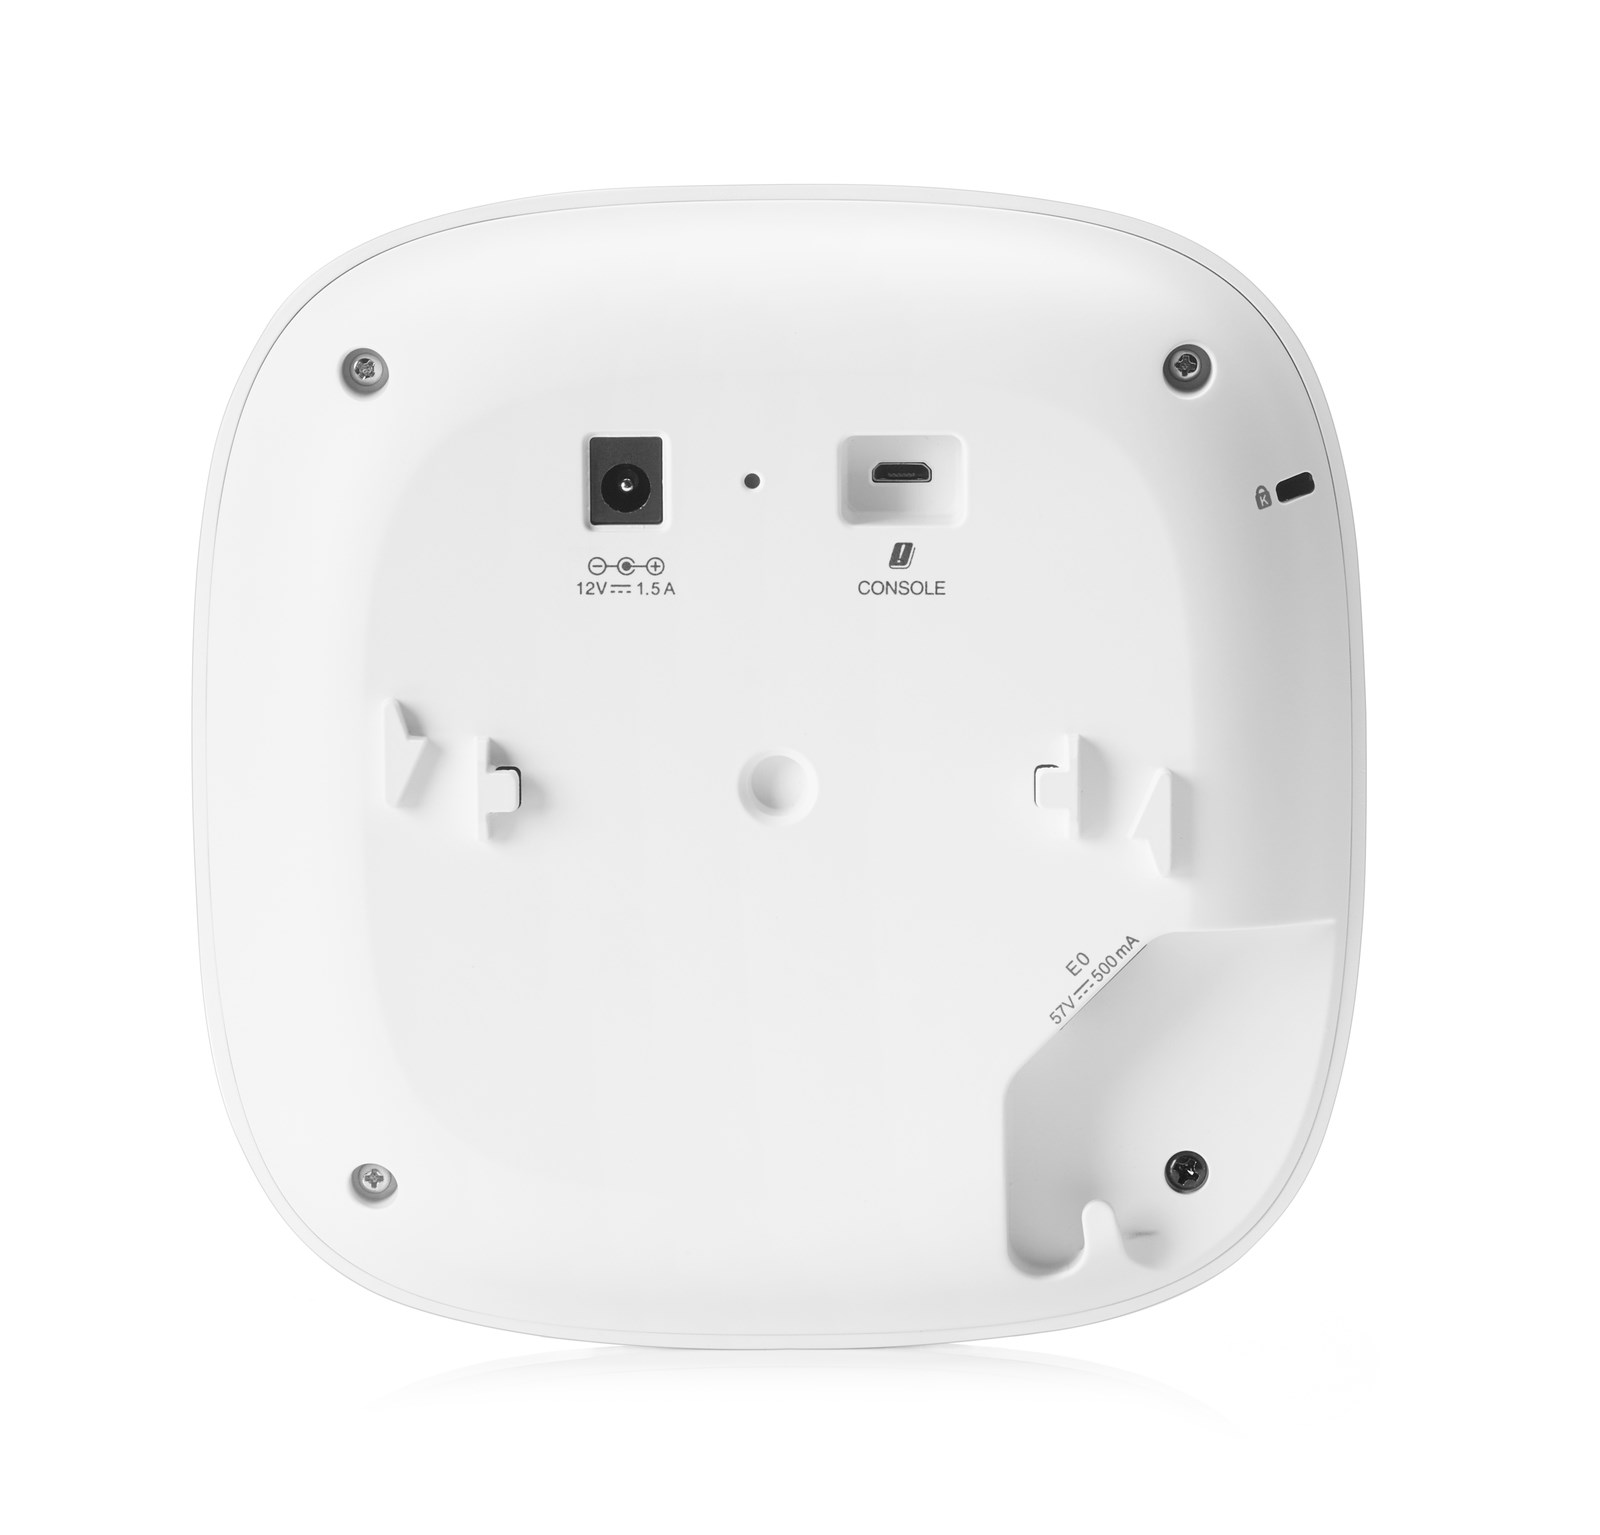 20 x Aruba Instant On AP22 (RW) 2x2 Wi-Fi 6 Indoor Access Point  ( 20 pack )1 